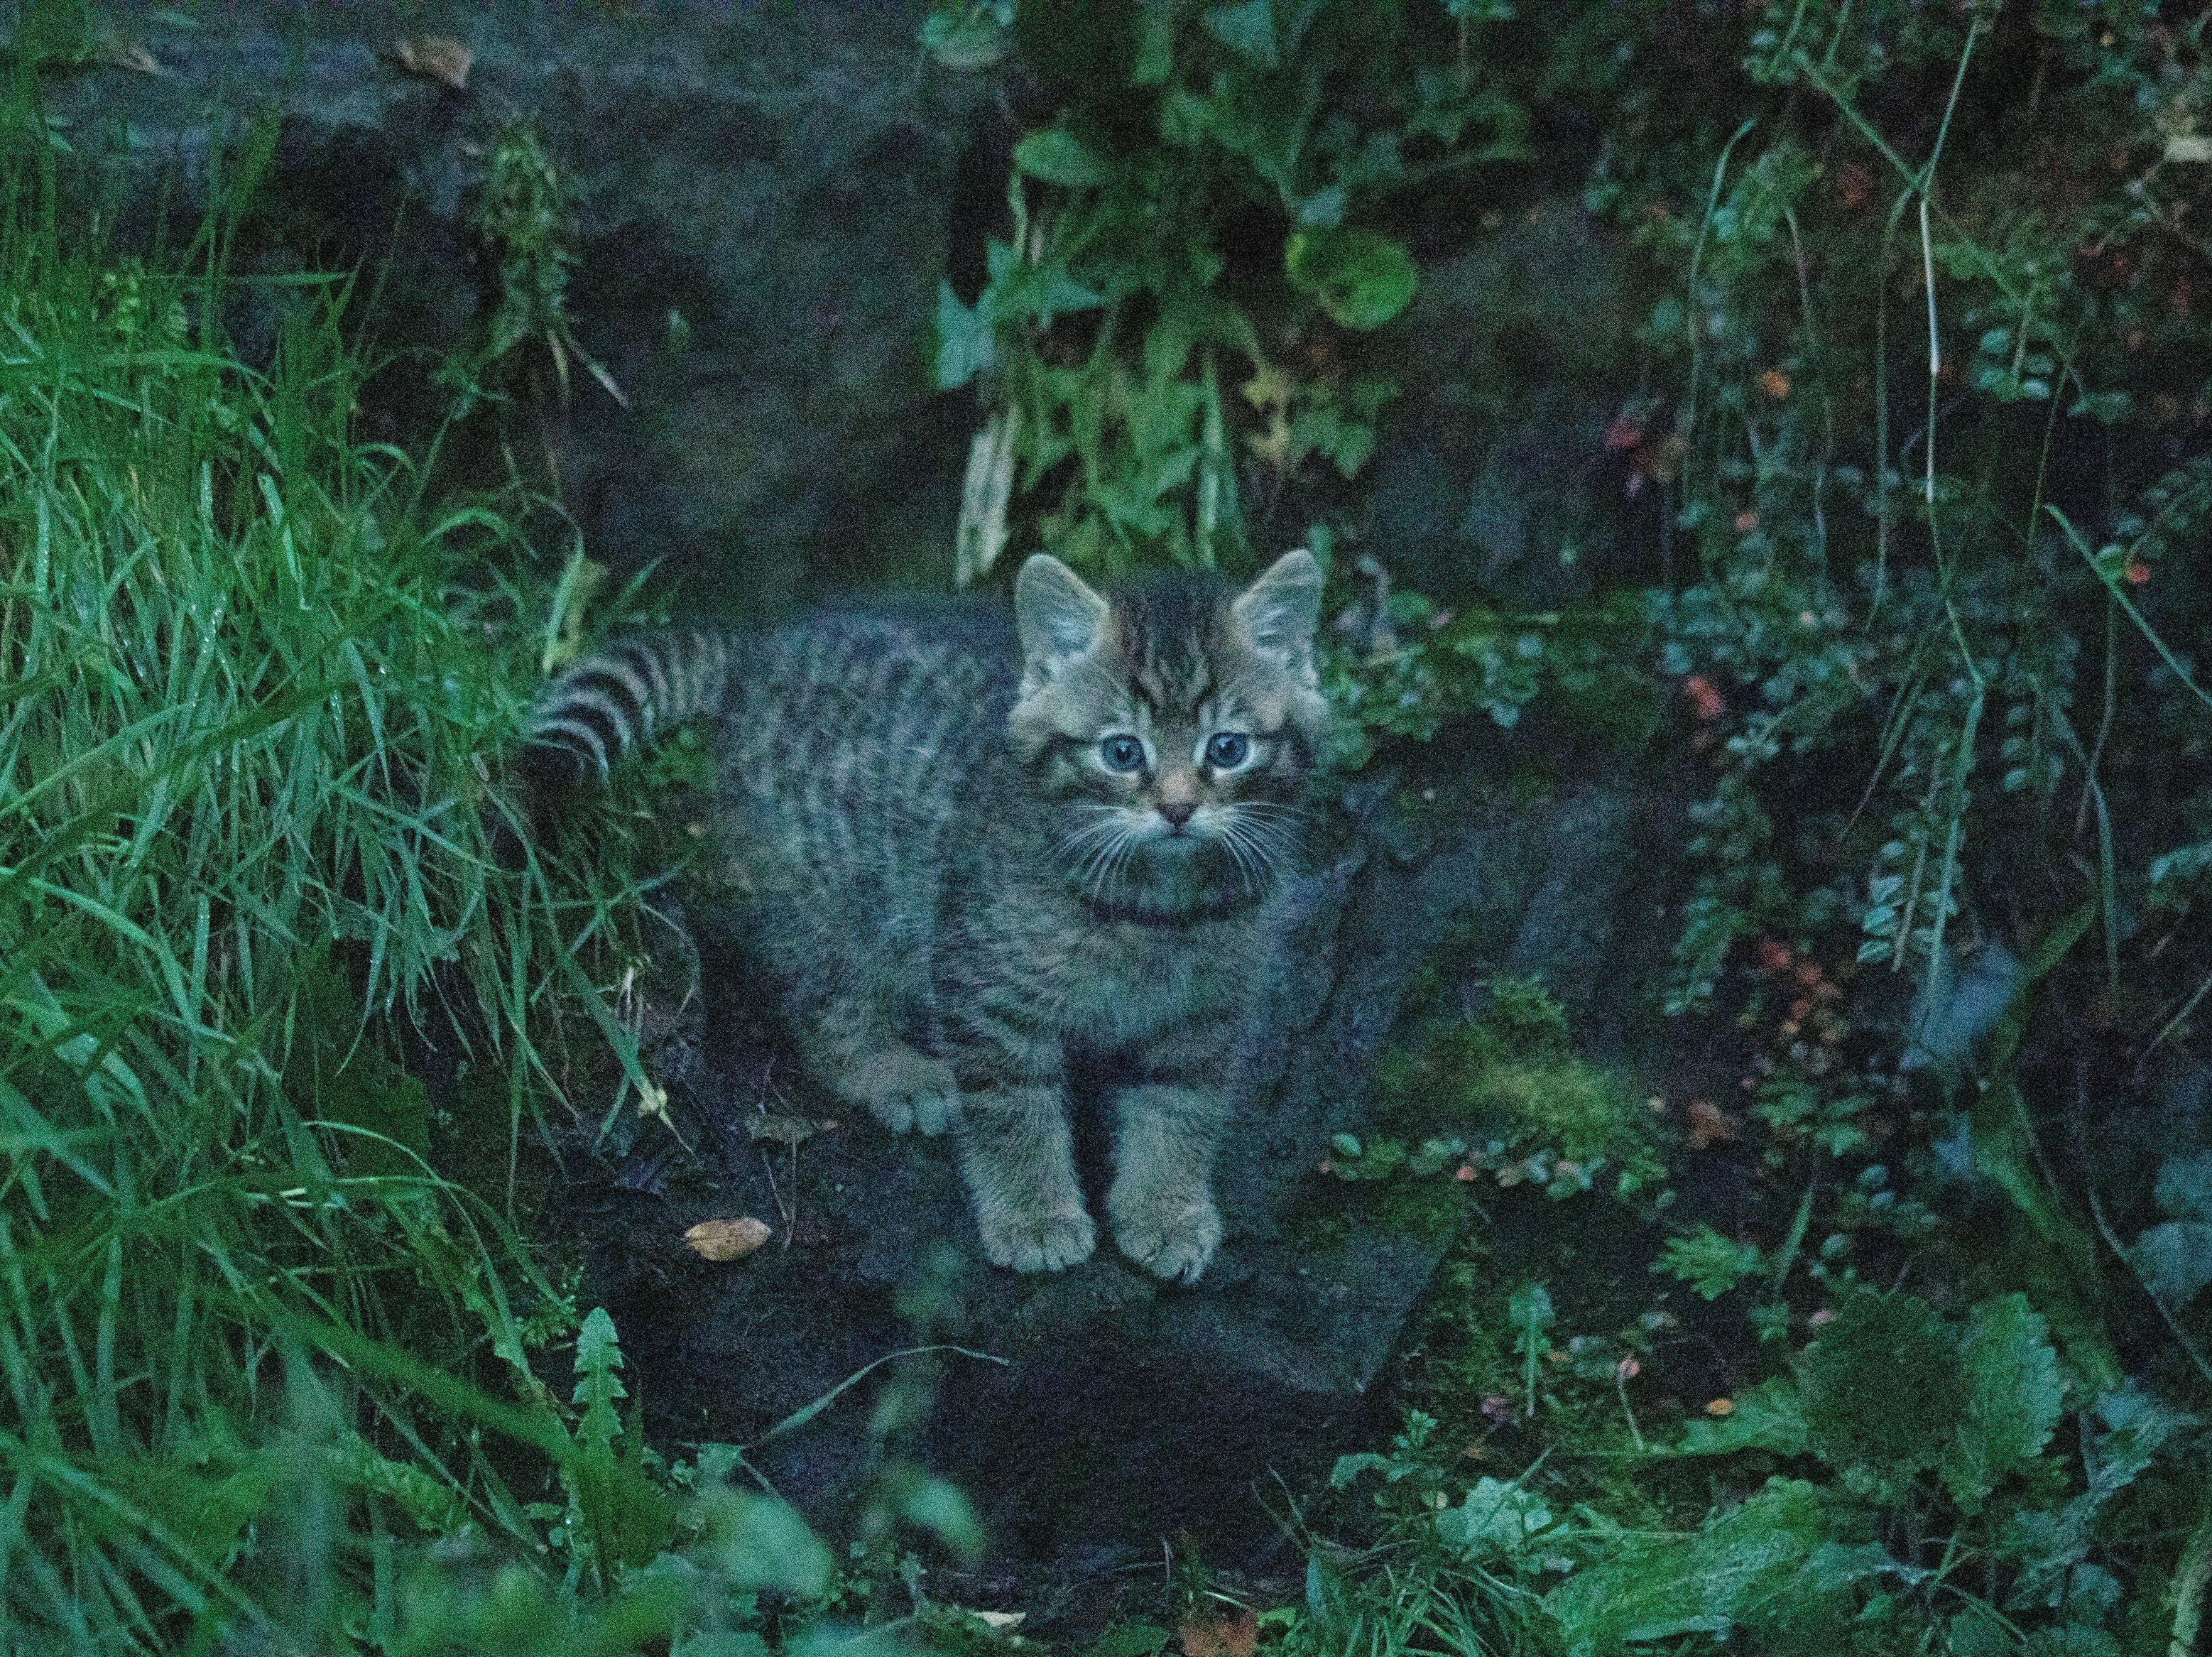 One of two critically-endangered wildcats born at Edinburgh Zoo in September 2020